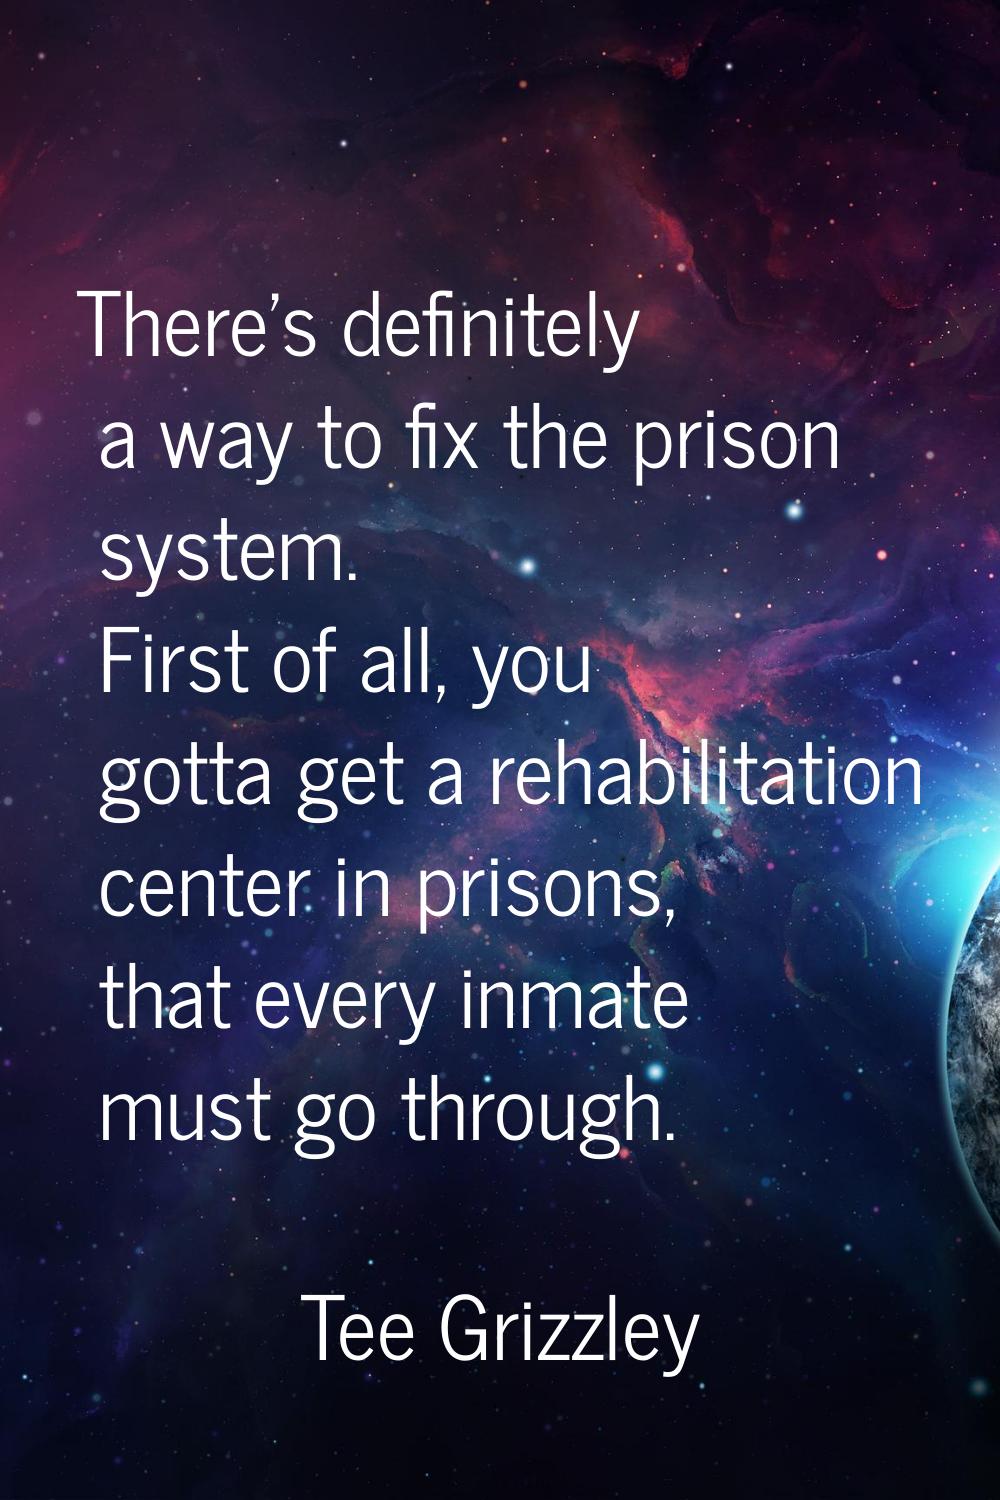 There's definitely a way to fix the prison system. First of all, you gotta get a rehabilitation cen